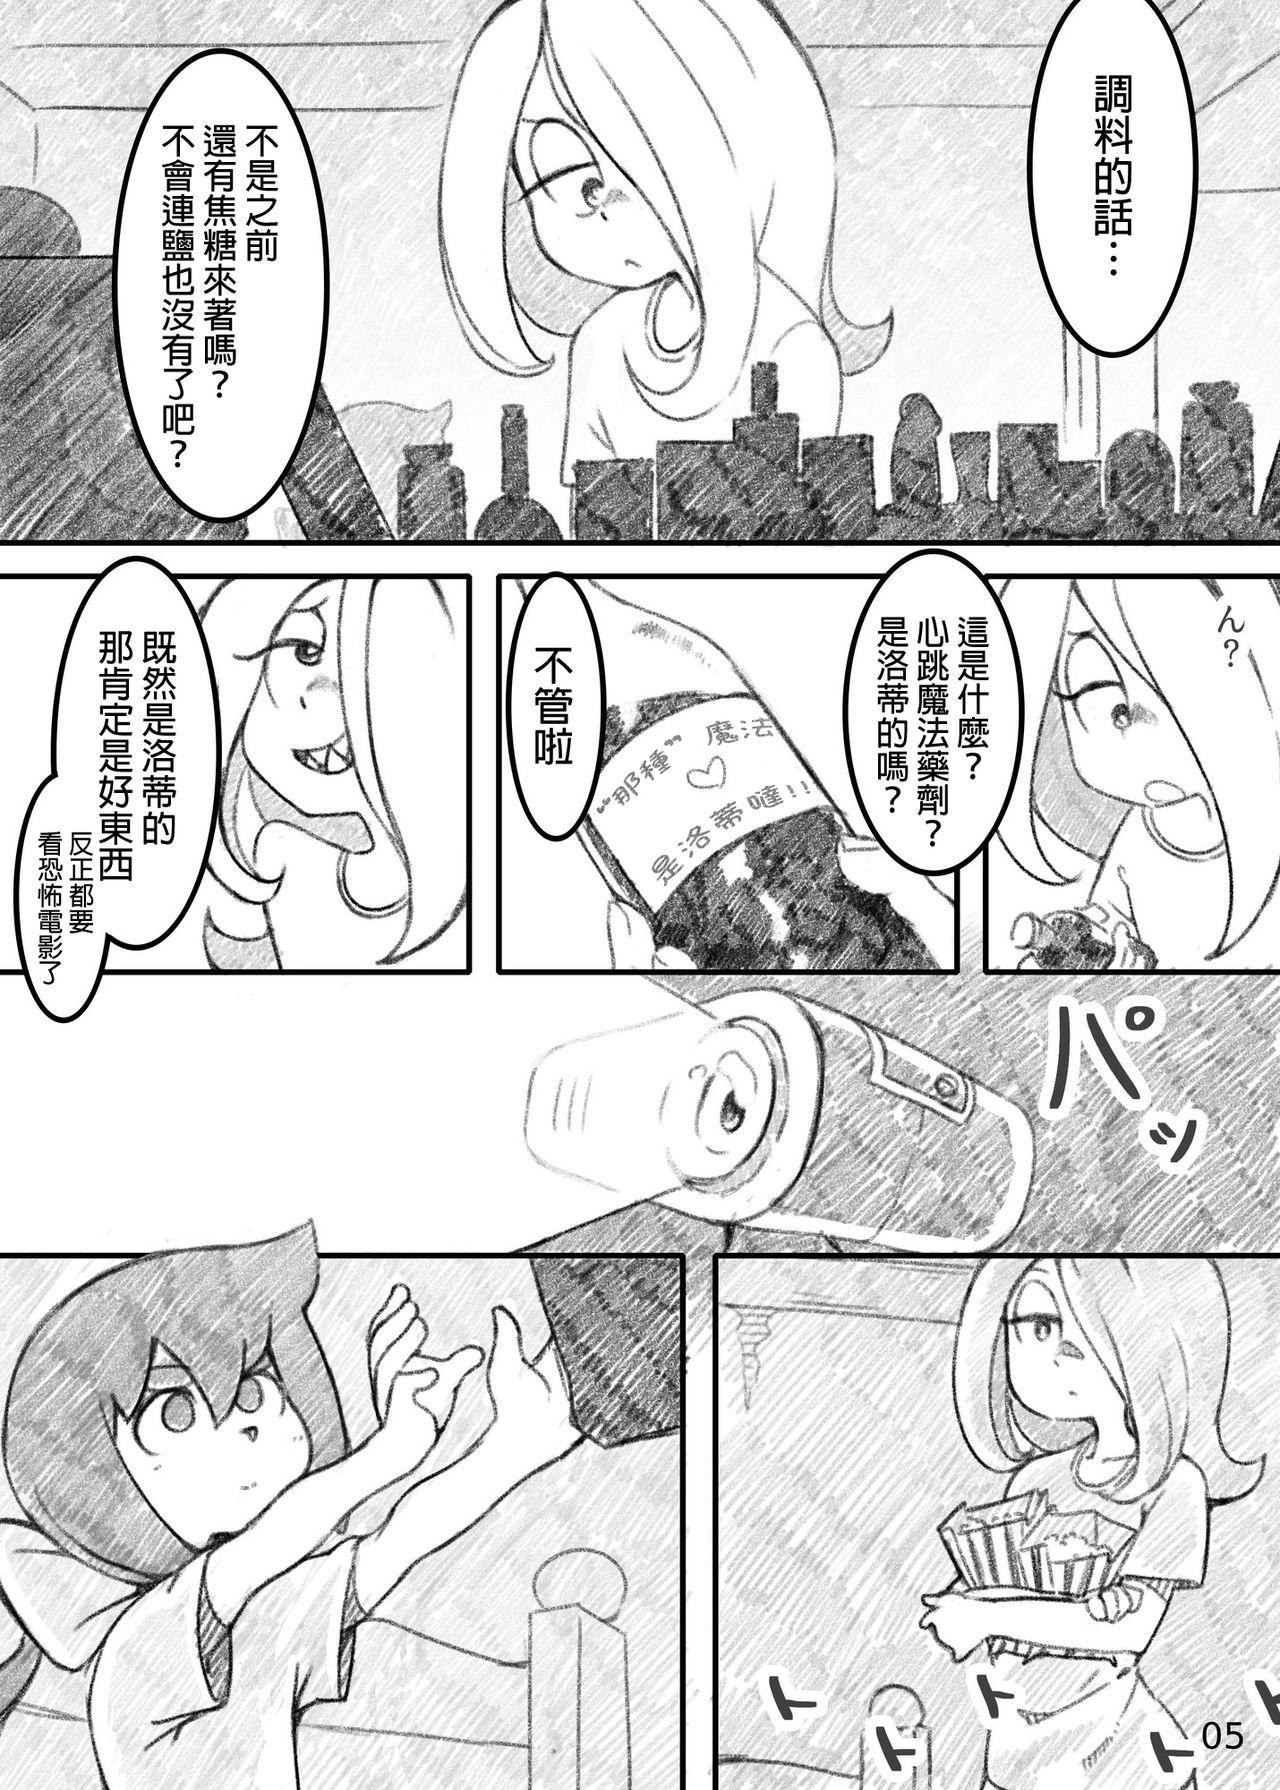 Amatuer Porn Movie Night - Little witch academia Cunnilingus - Page 5